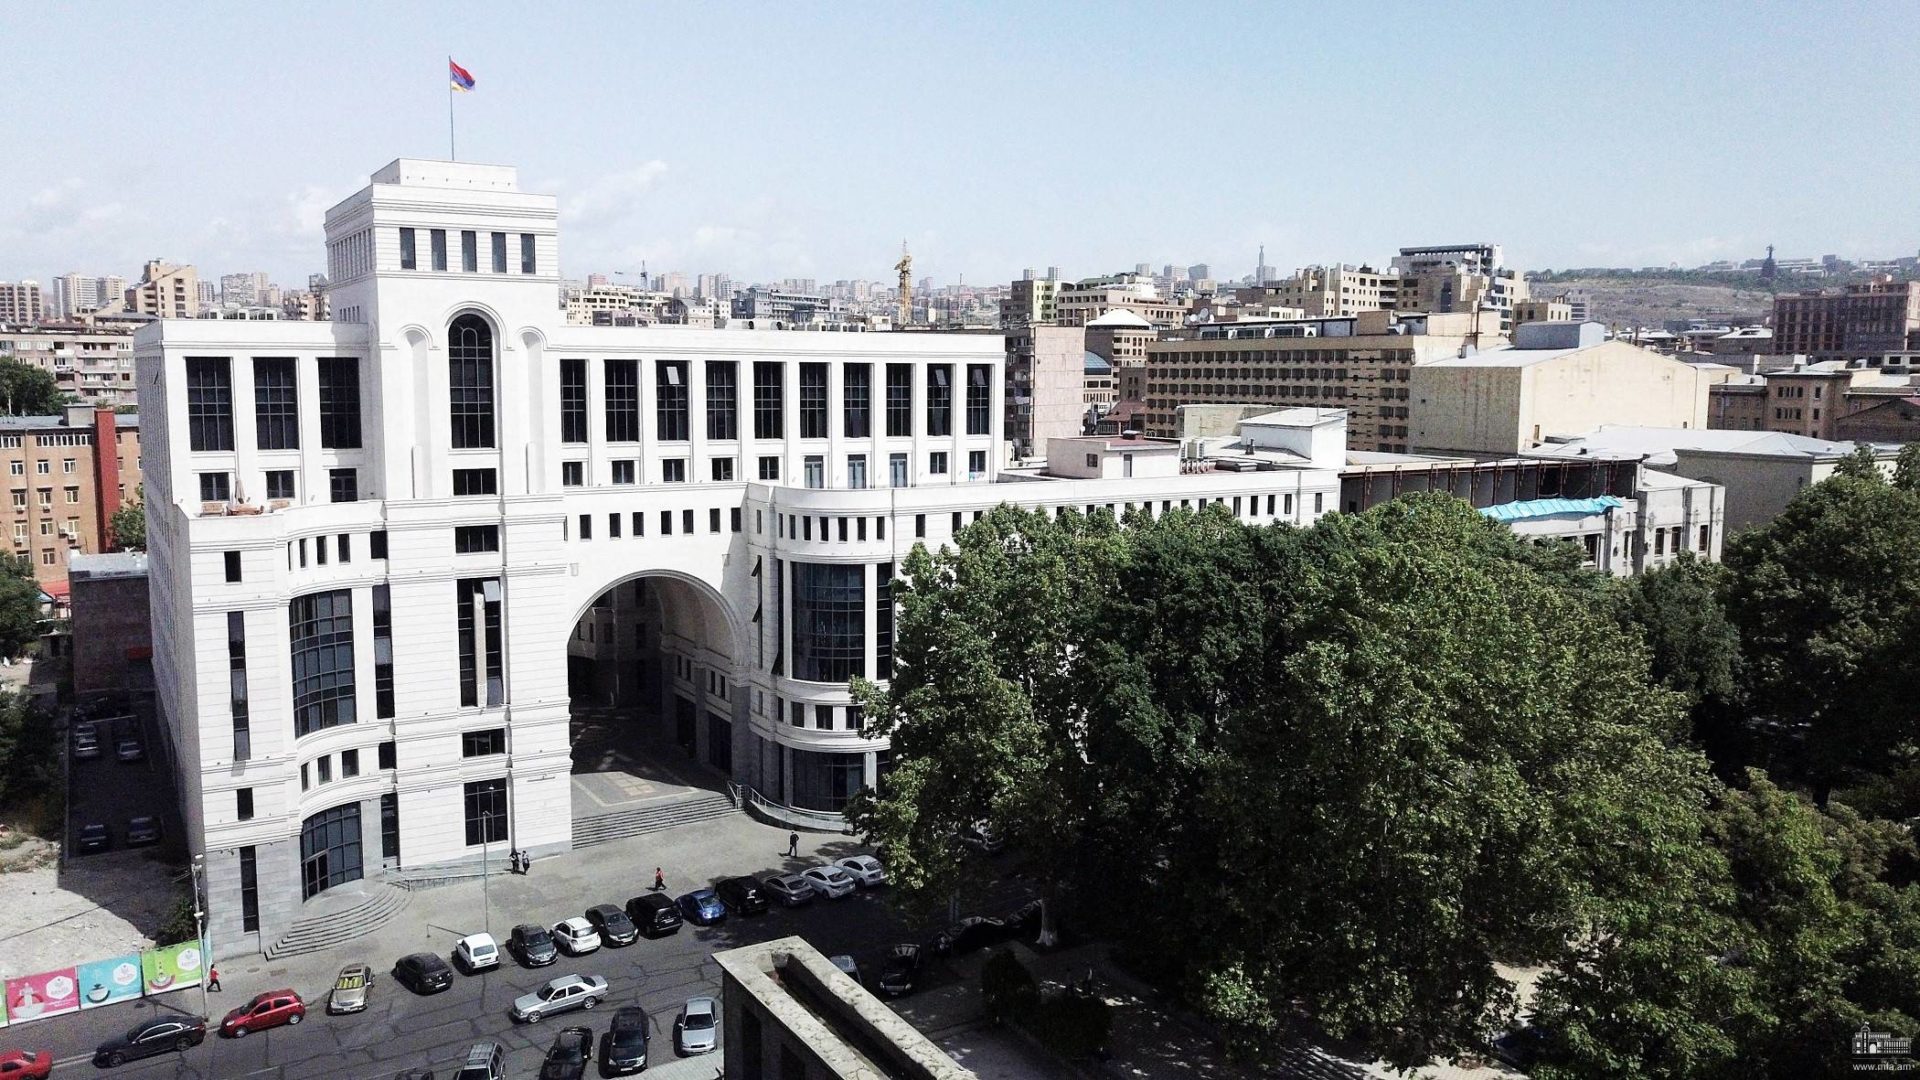 Baku is trying to create new sources of tension: Armenia MFA - The US Armenians